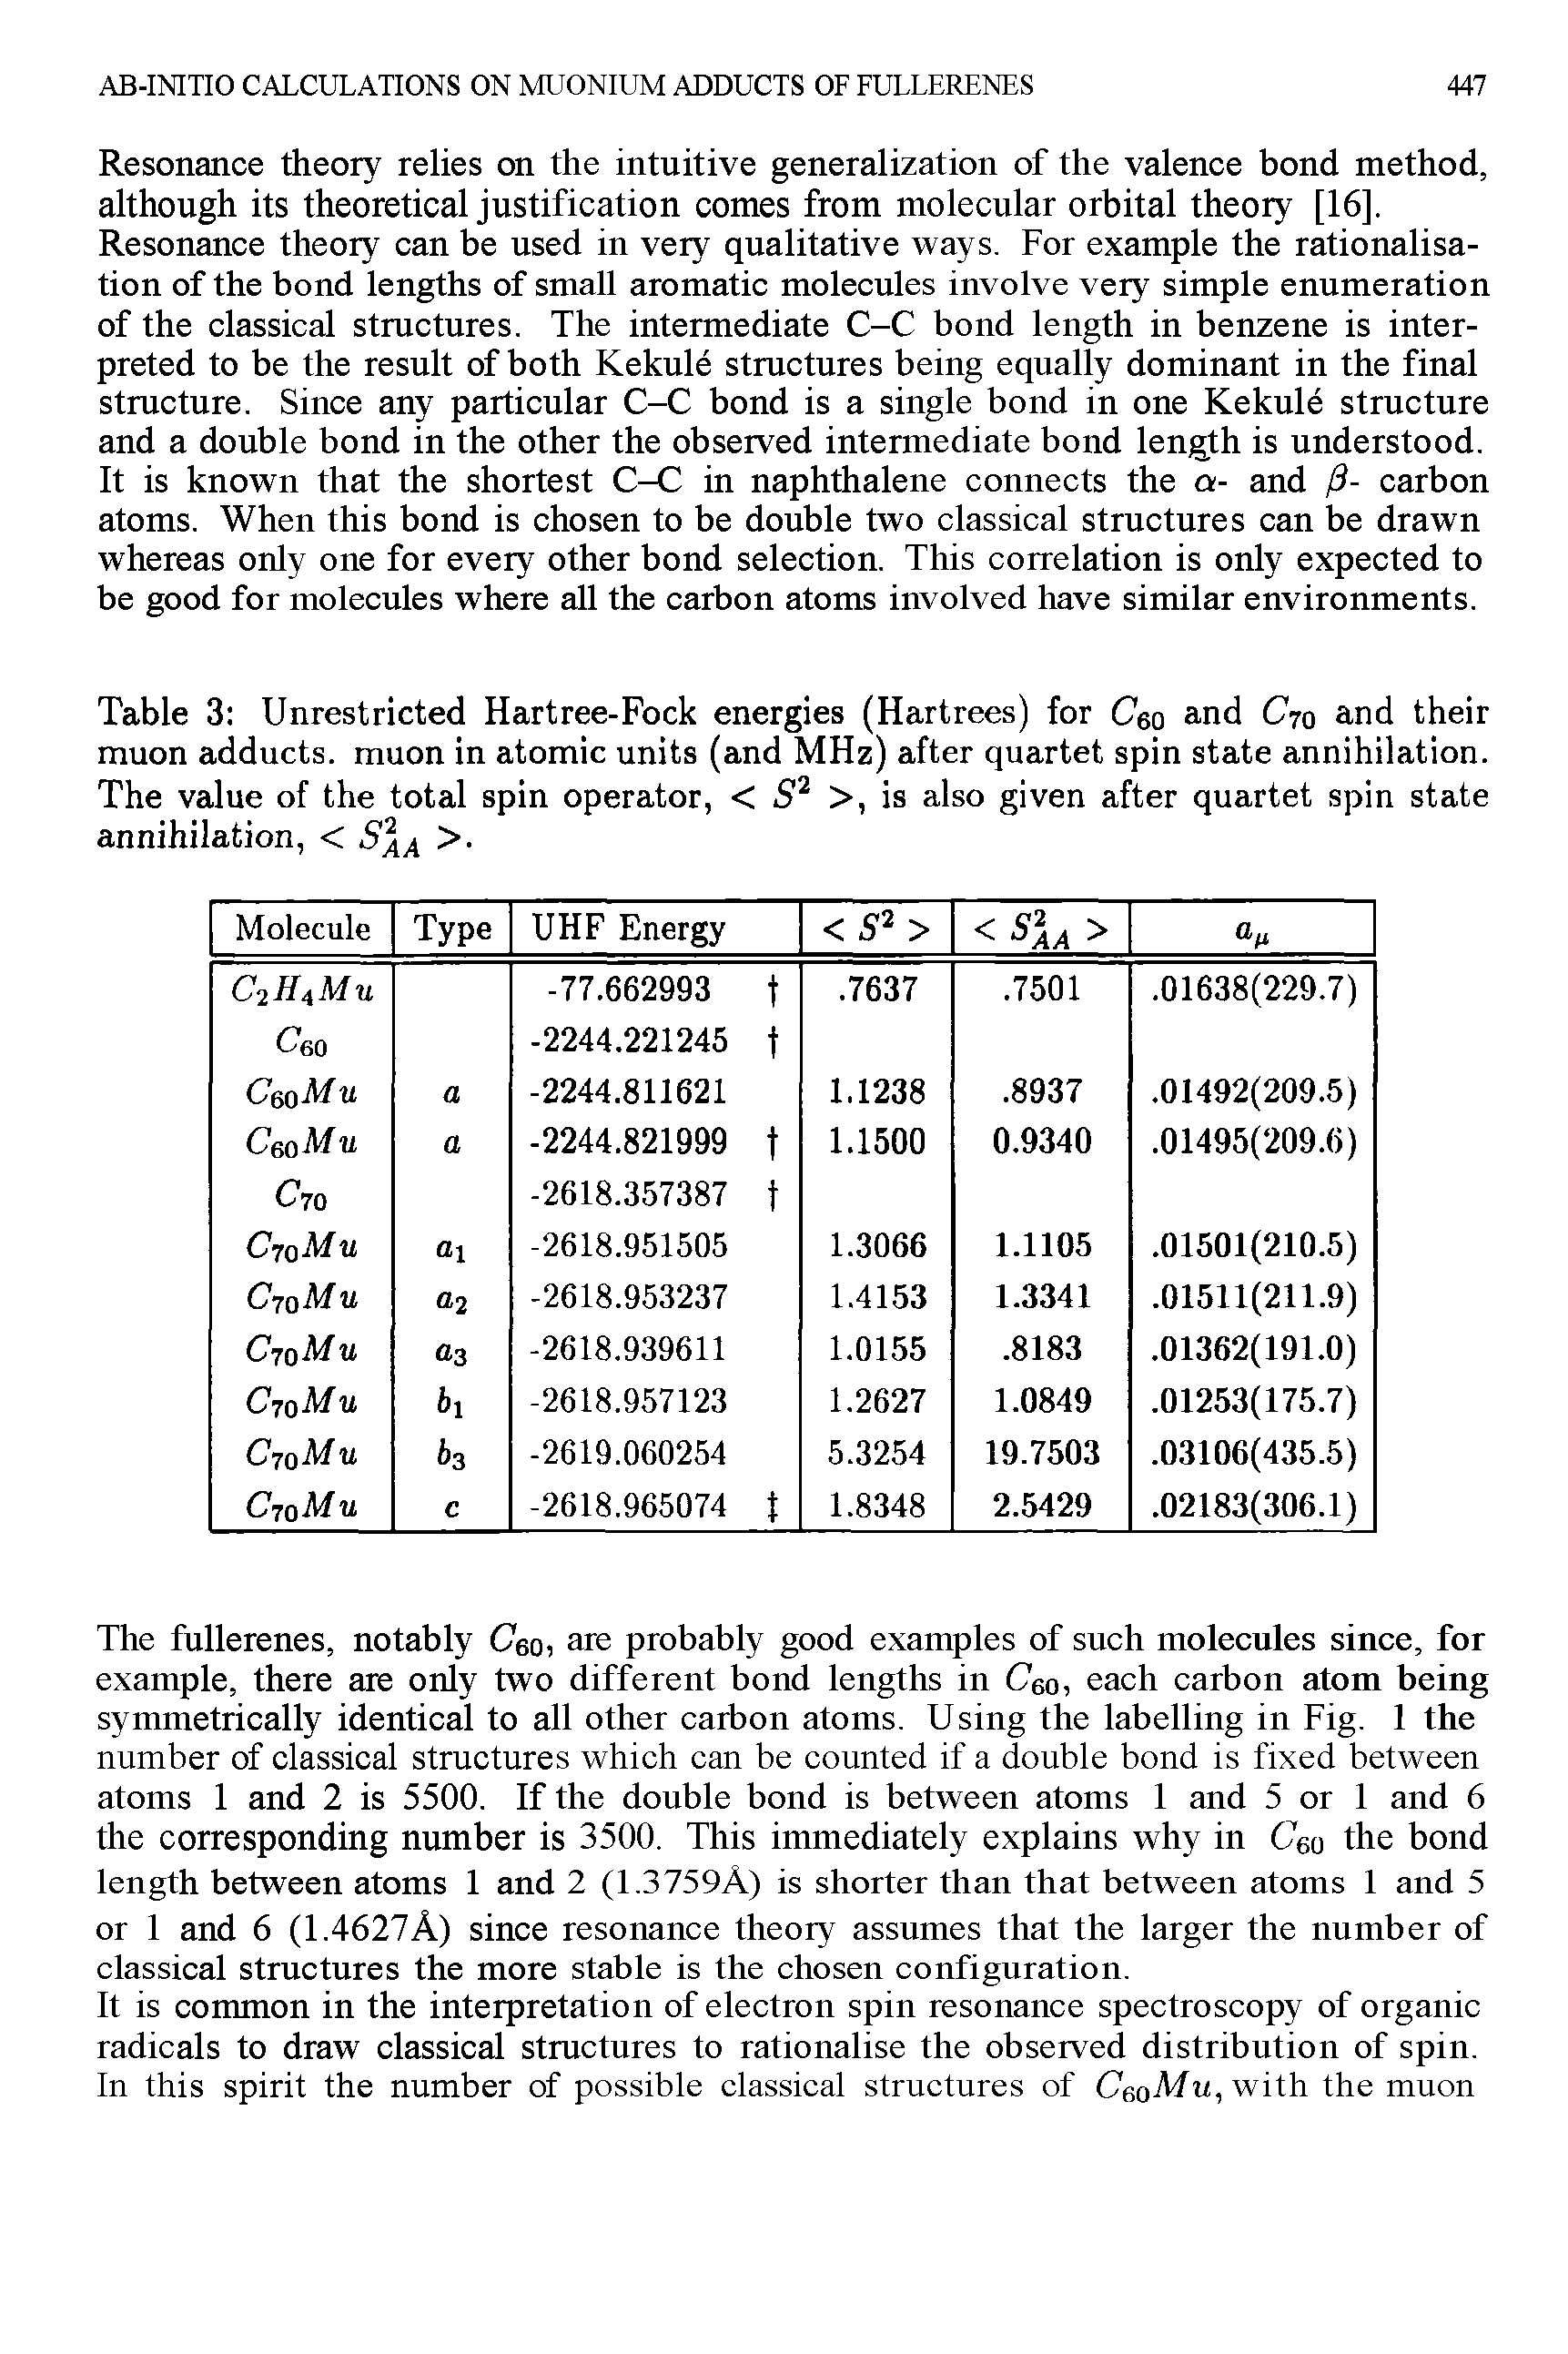 Table 3 Unrestricted Hartree-Fock energies (Hartrees) for Ceo and C70 and their muon adducts, muon in atomic units (and MHz) after quartet spin state annihilation. The value of the total spin operator, < >, is also given after quartet spin state...